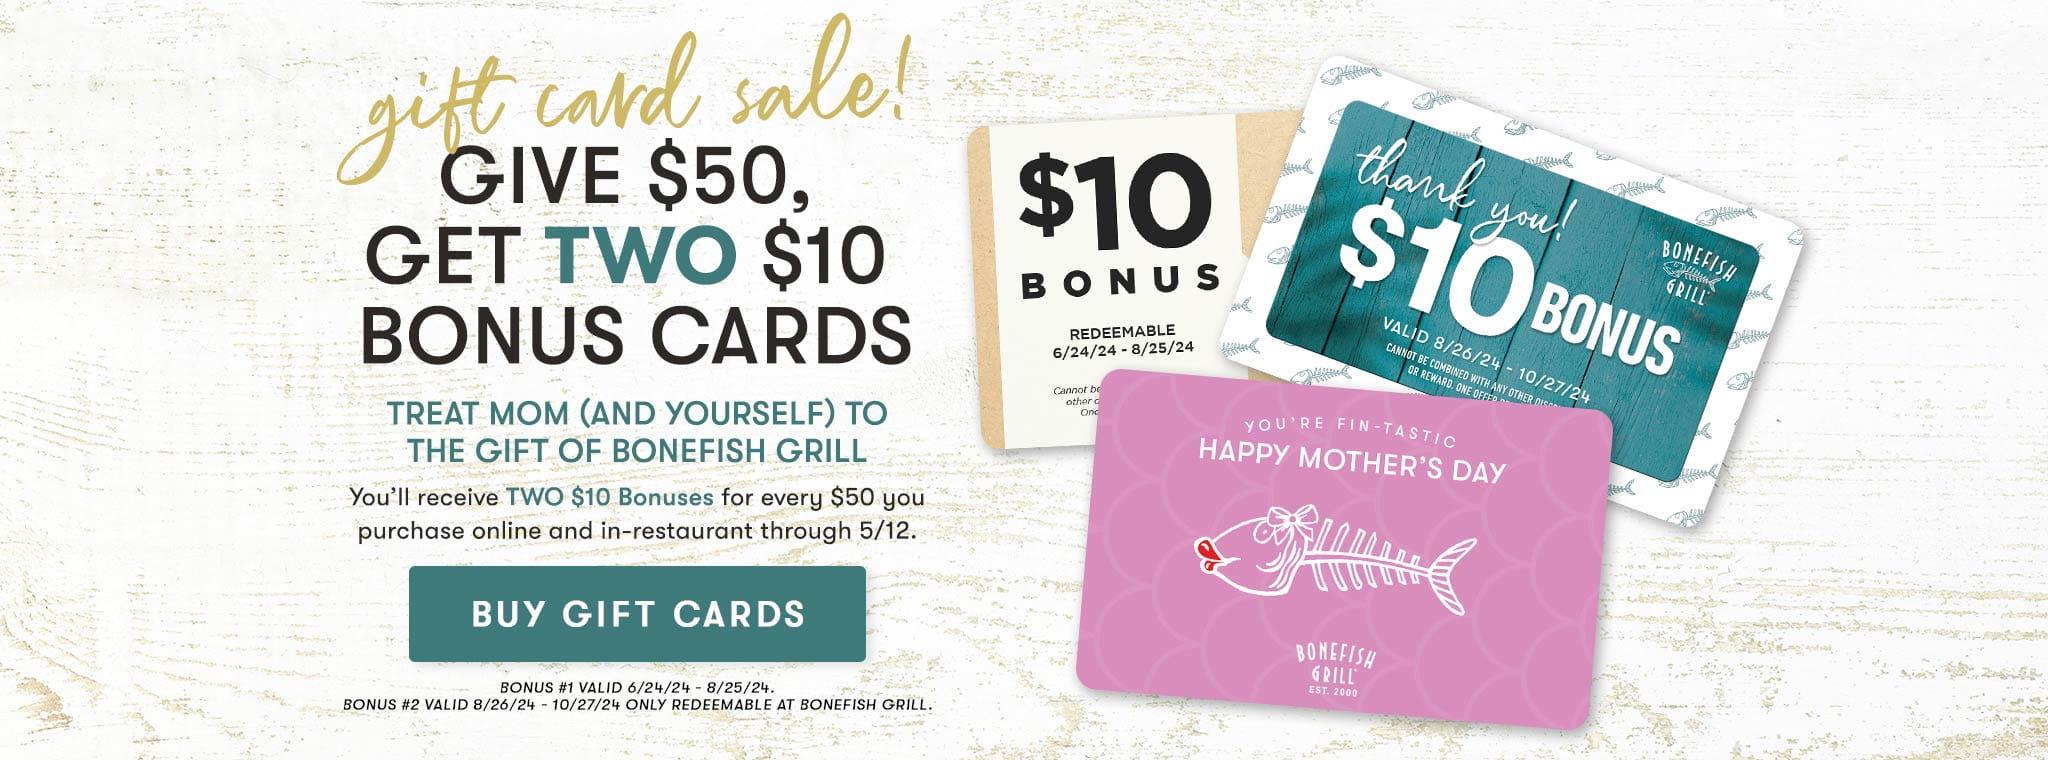 Gift card sale! Give $50, get TWO $10 bonus cards